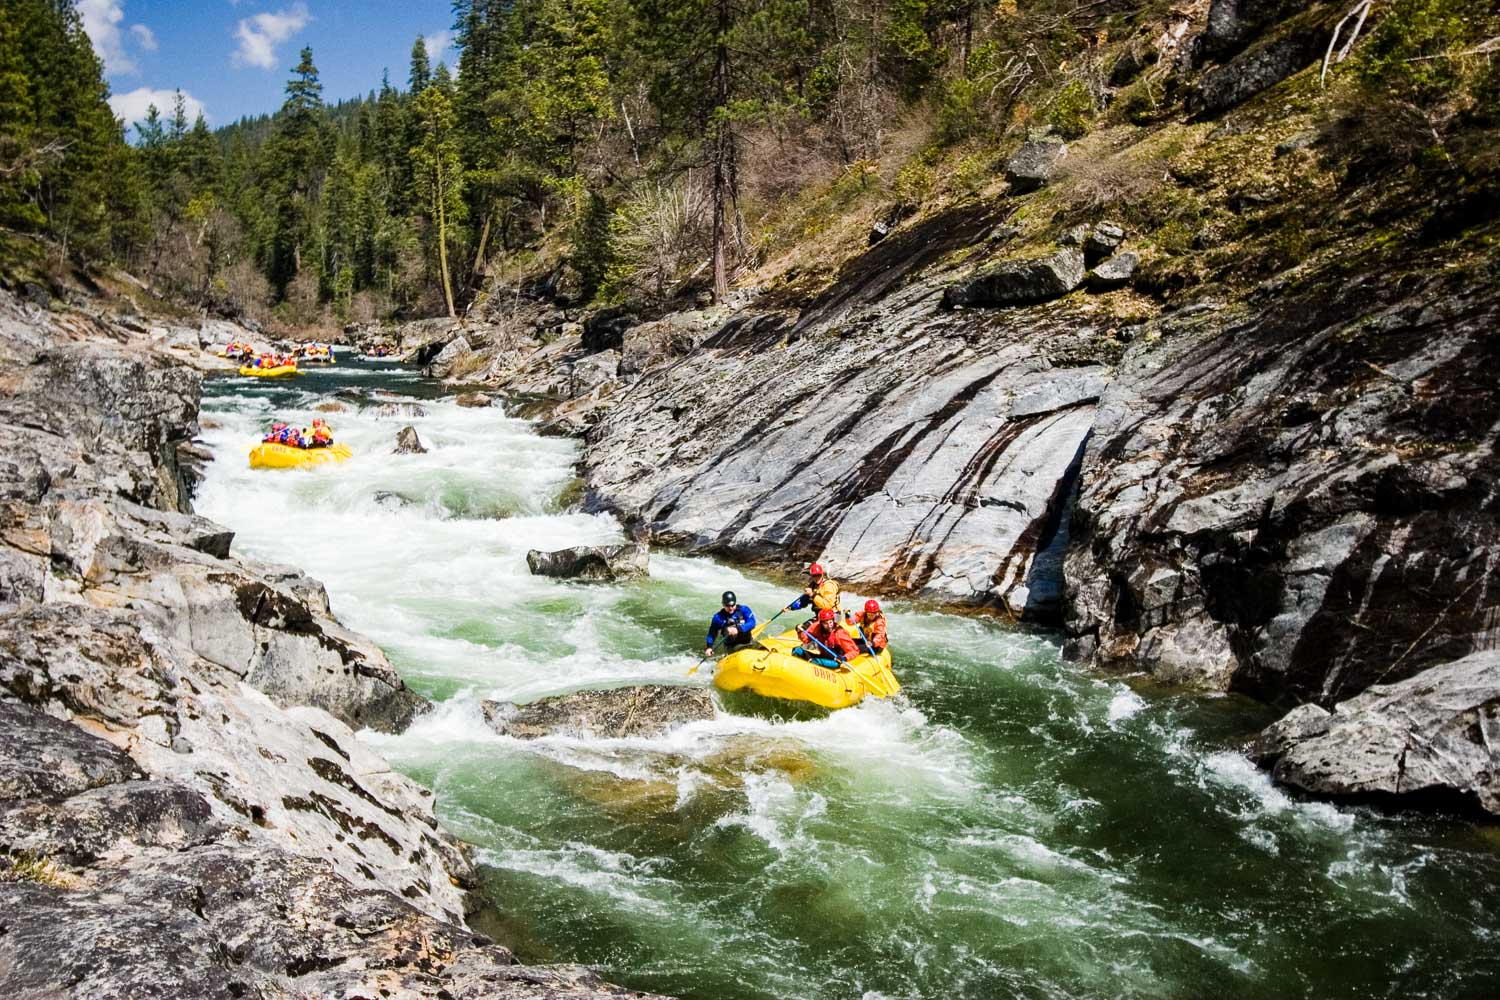 Rafting on the North Fork of the Stanislaus River in Calaveras County